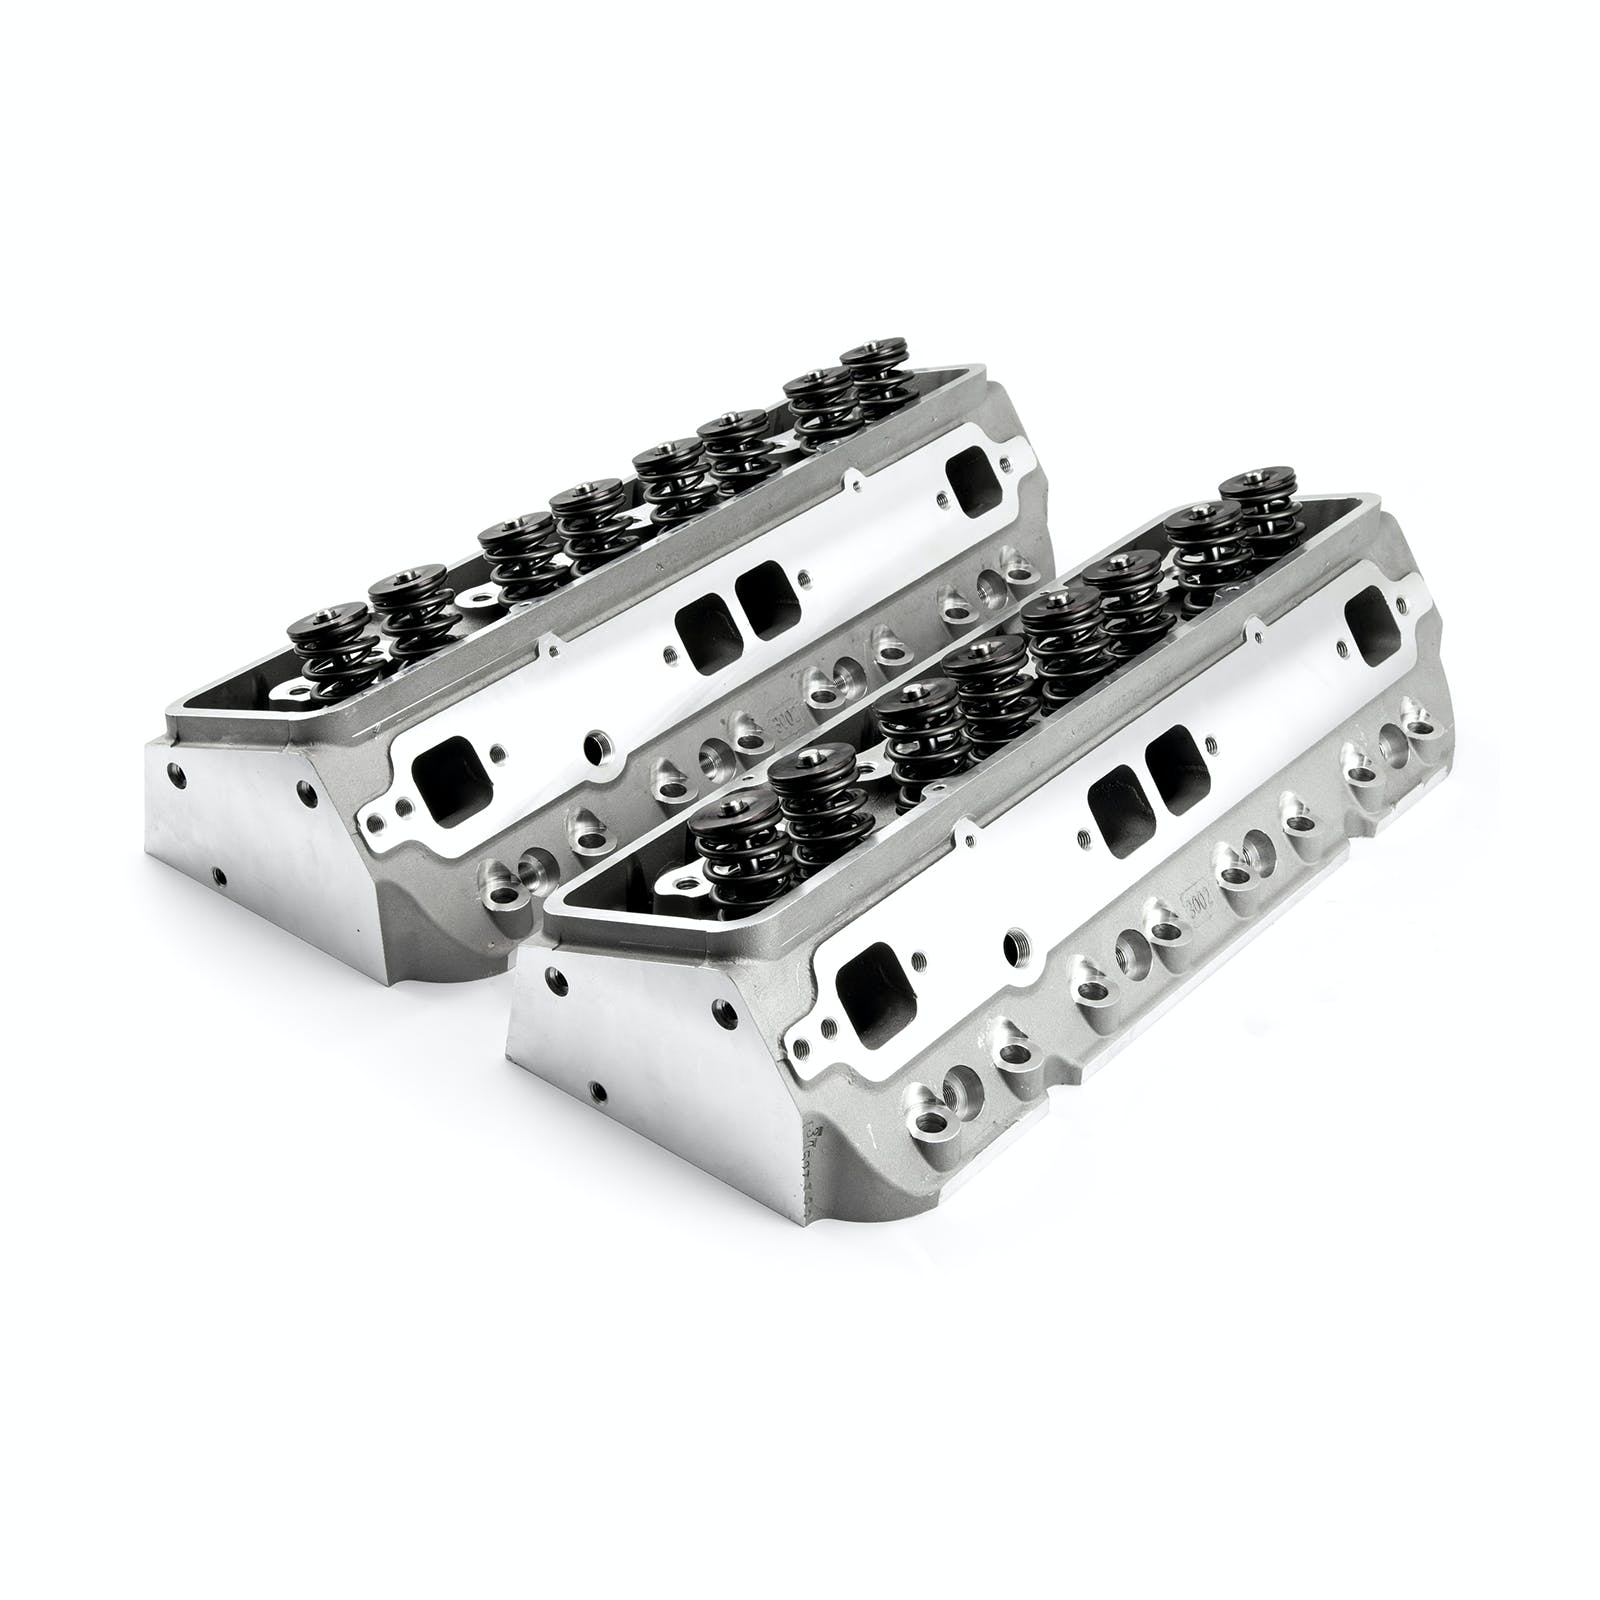 Speedmaster PCE281.2005 190cc 64cc Straight Solid-FT Complete Aluminum Cylinder Heads